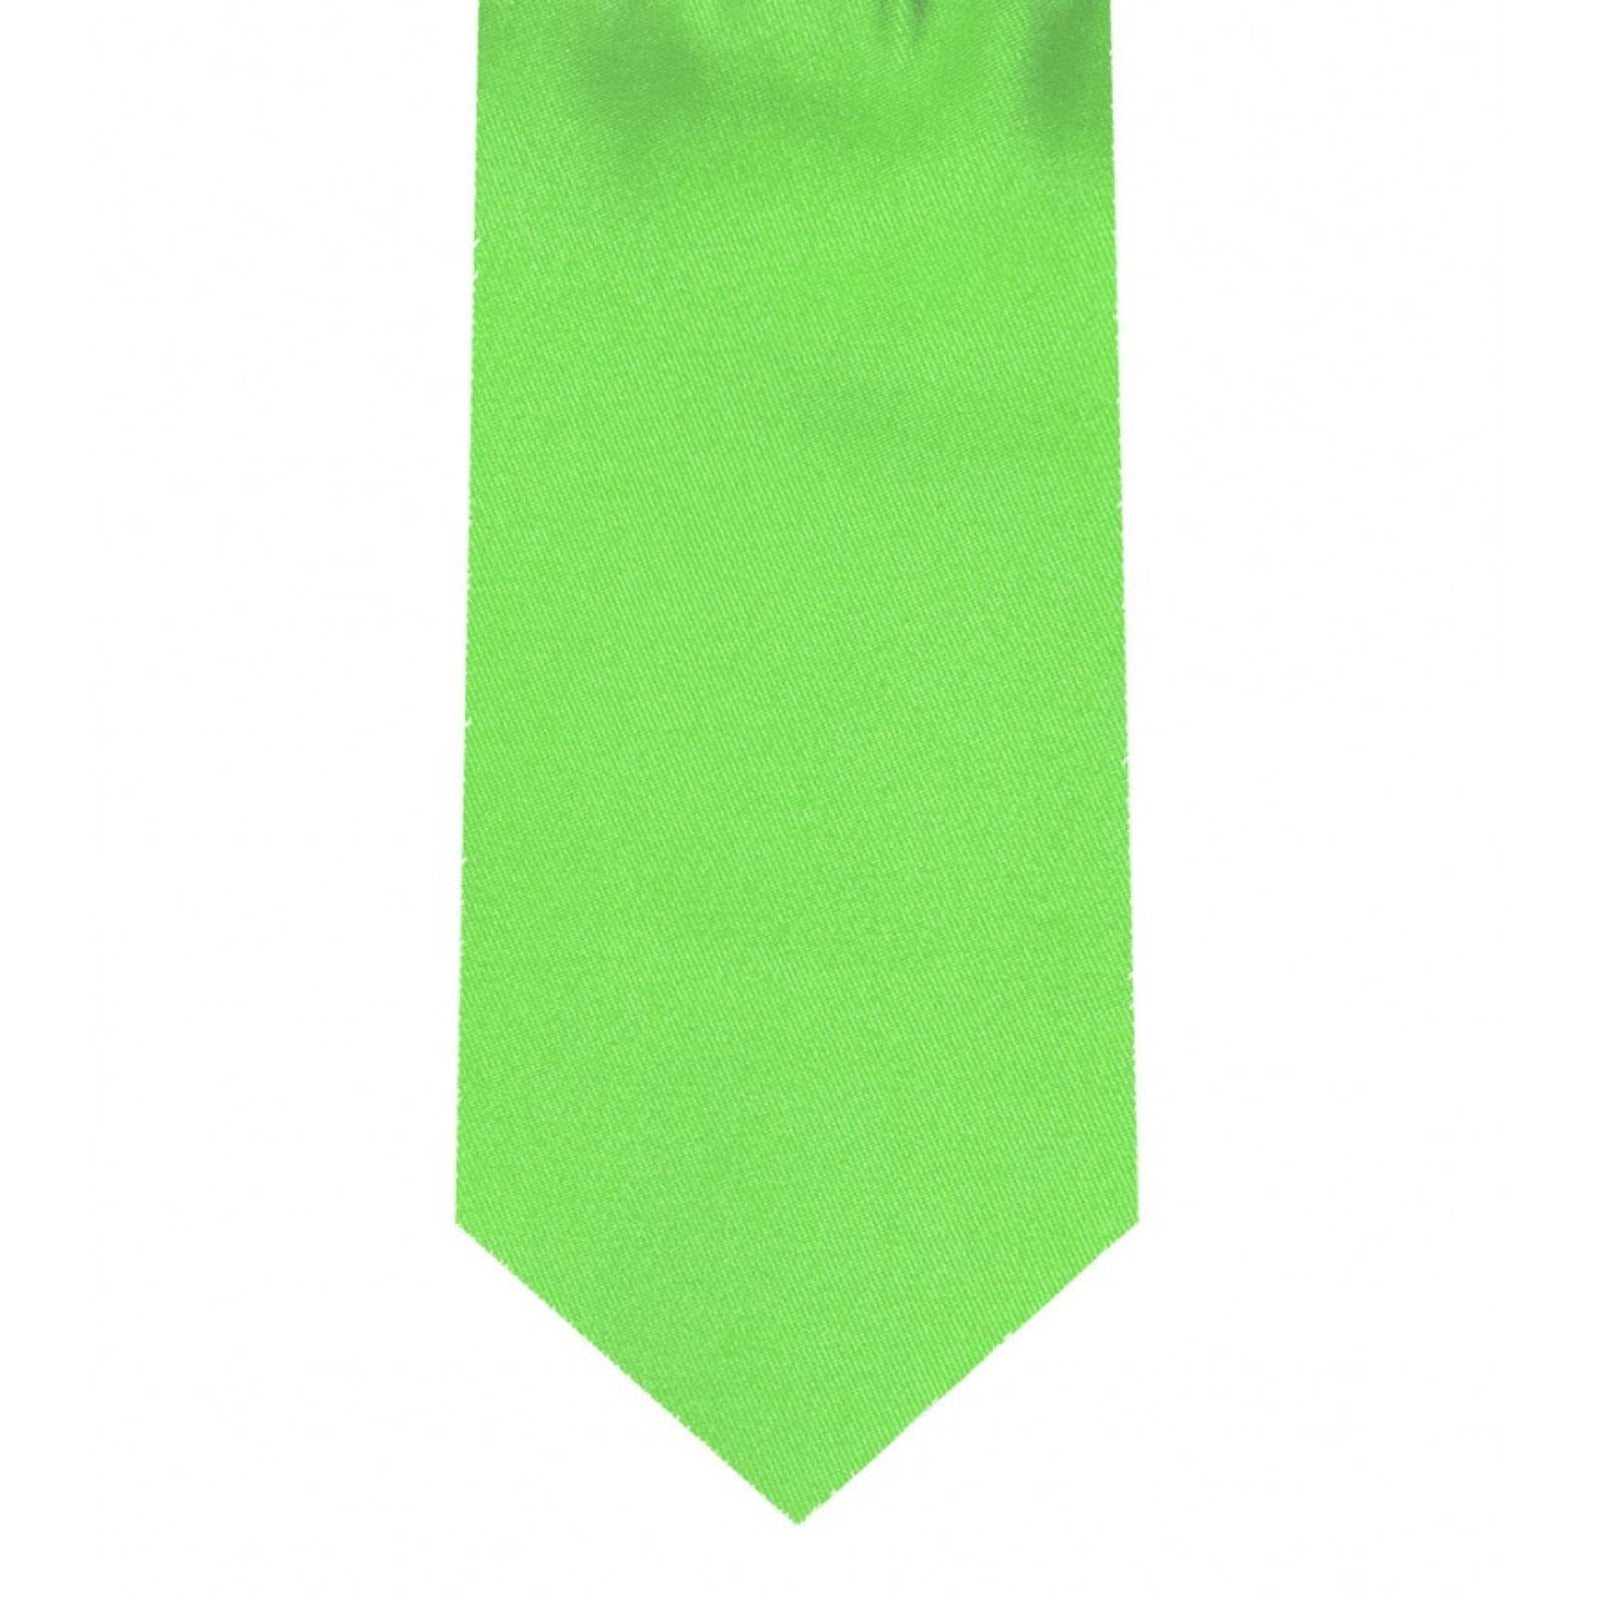 Classic Lettuce Green Tie Skinny width 2.75 inches With Matching Pocket Square | KCT Menswear